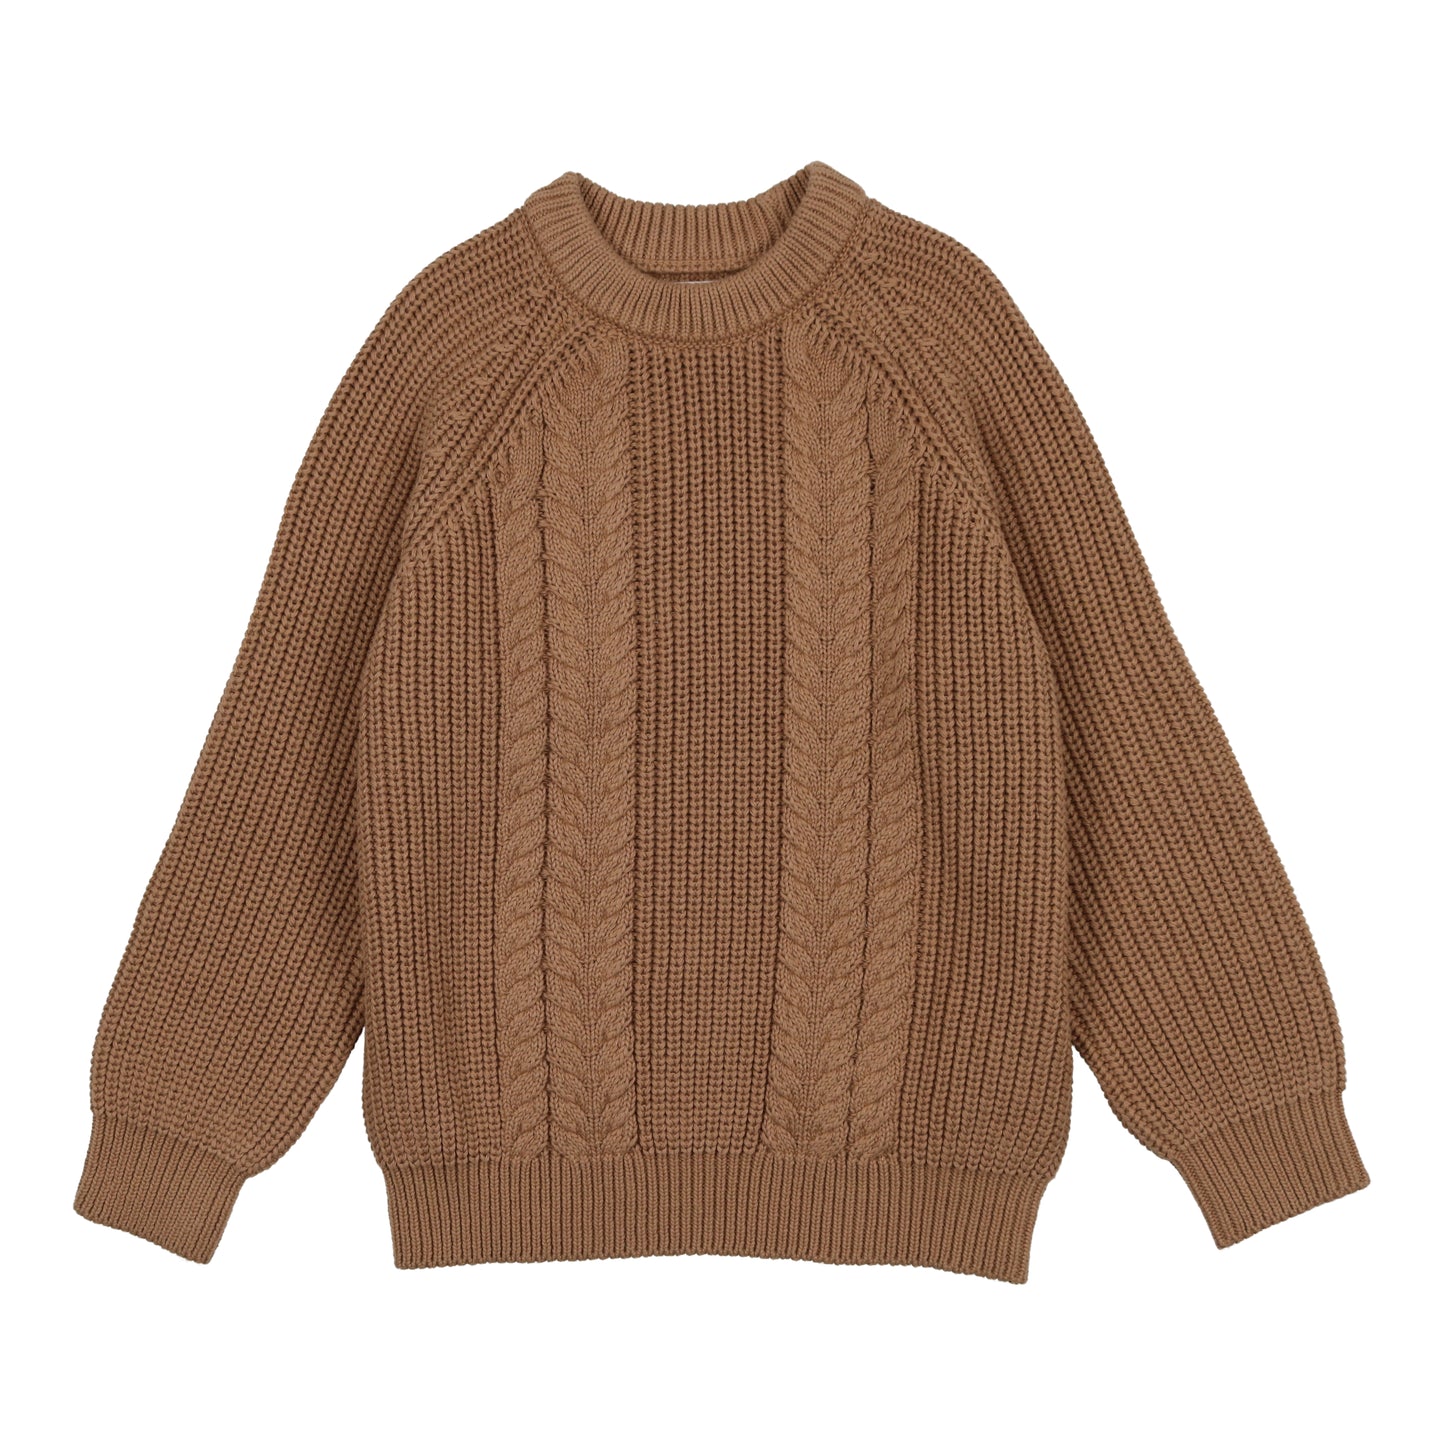 Coco Blanc Boys Cable Knit Sweater